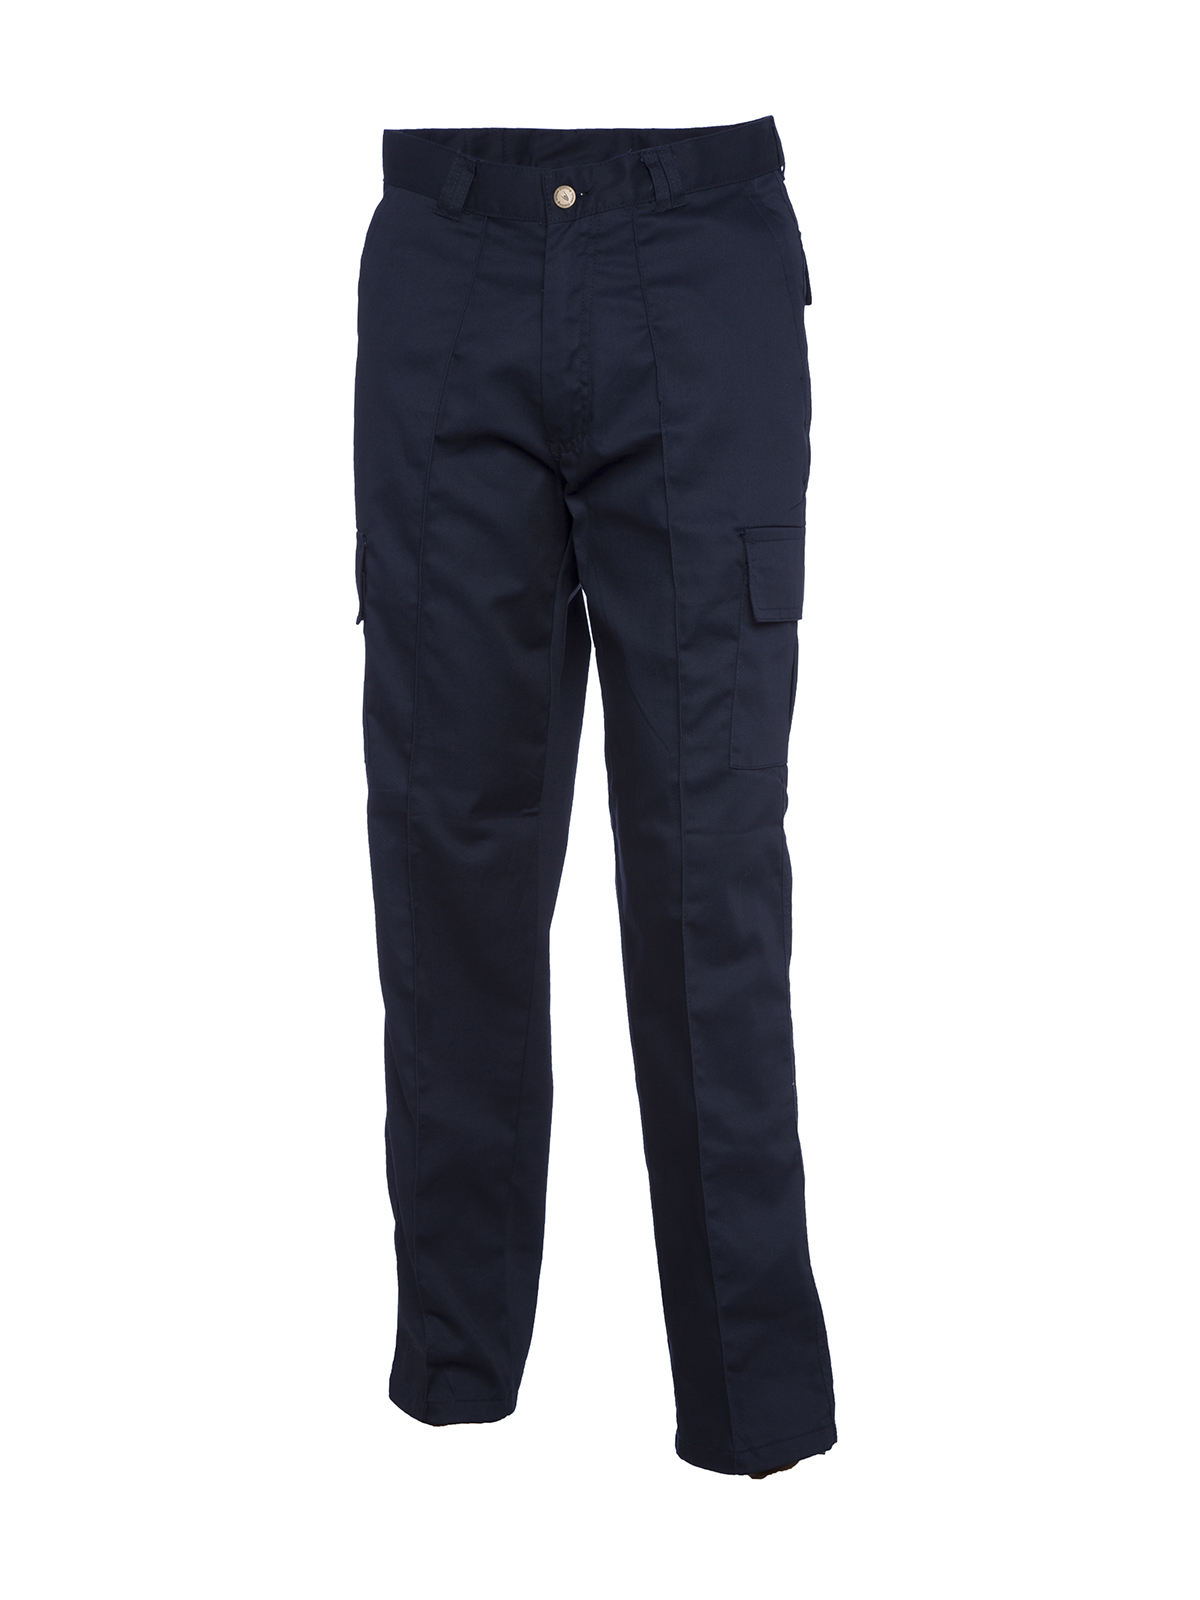 Cargo Trousers, Navy Blue - 46S